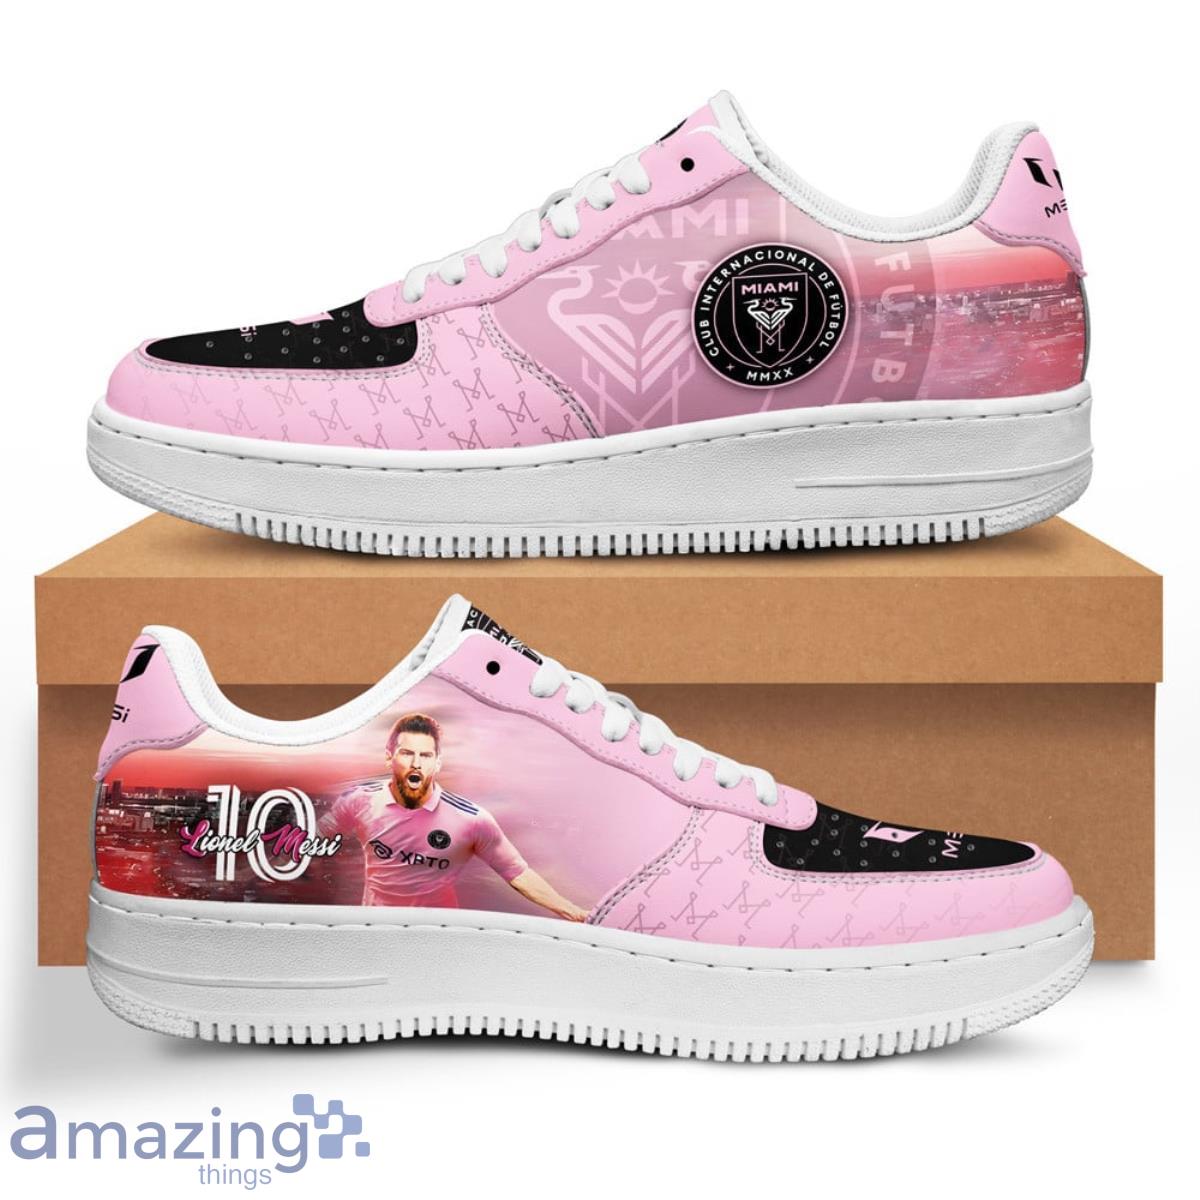 Inter Miami Goat Messi Air Force 1 Shoes For True Fans Product Photo 1